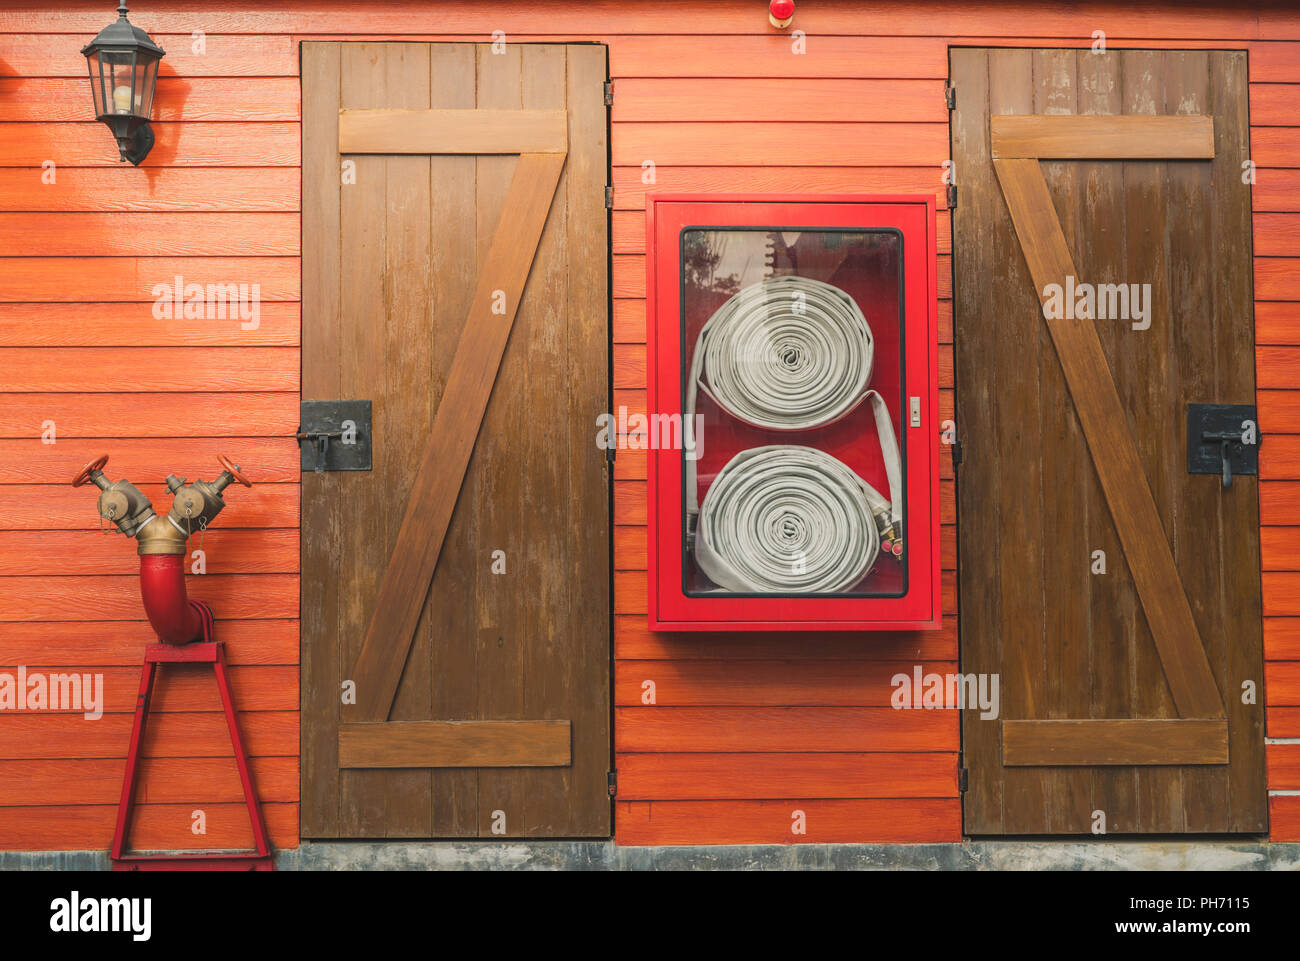 Fire hose in red cabinet hanging on orange wooden wall. Fire emergency equipment box for safety and security system. Fire safety pump. Deluge system o Stock Photo